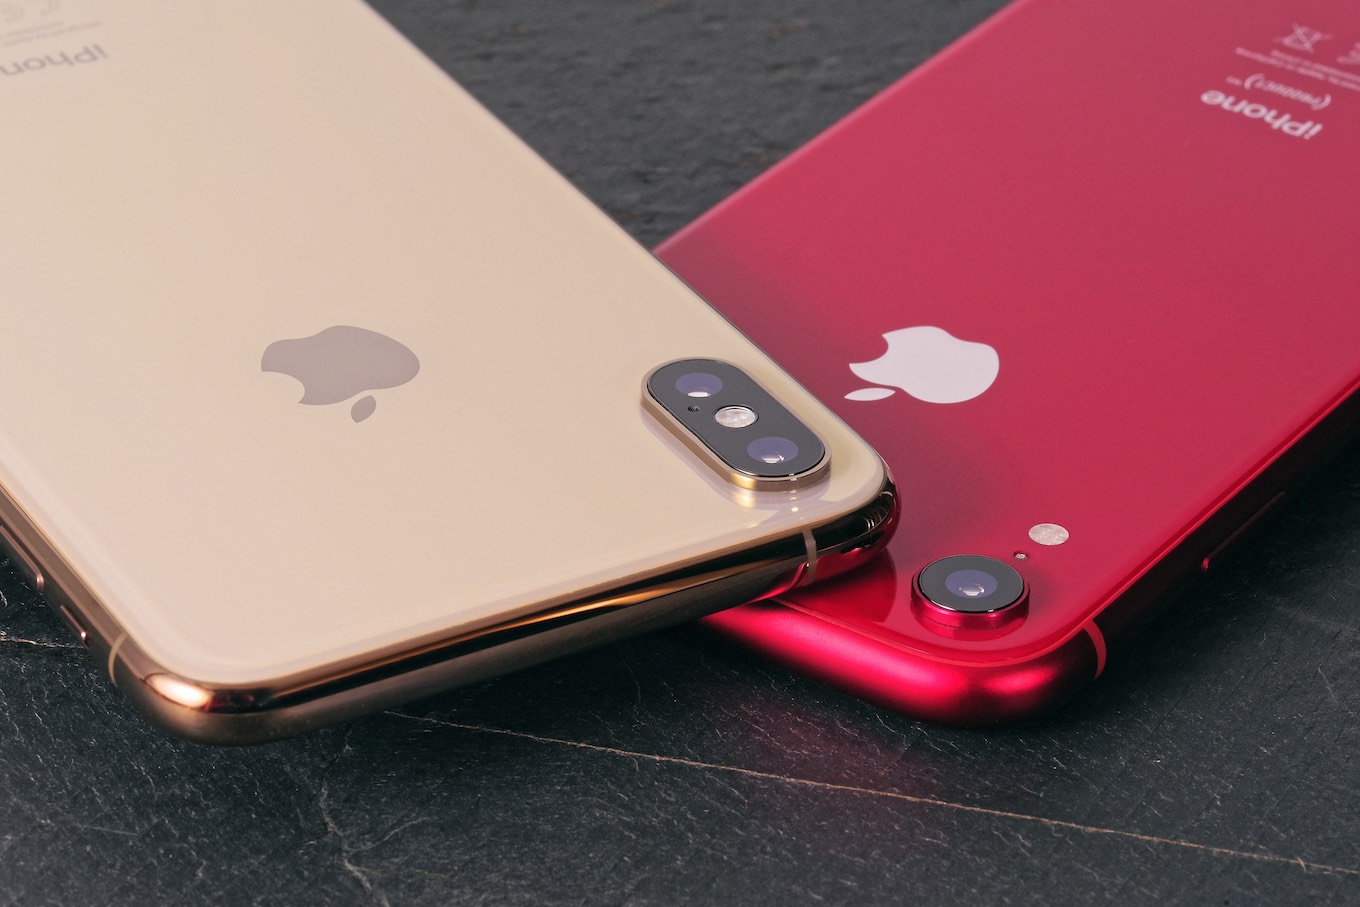 An iPhone XS and an iPhone XR side by side